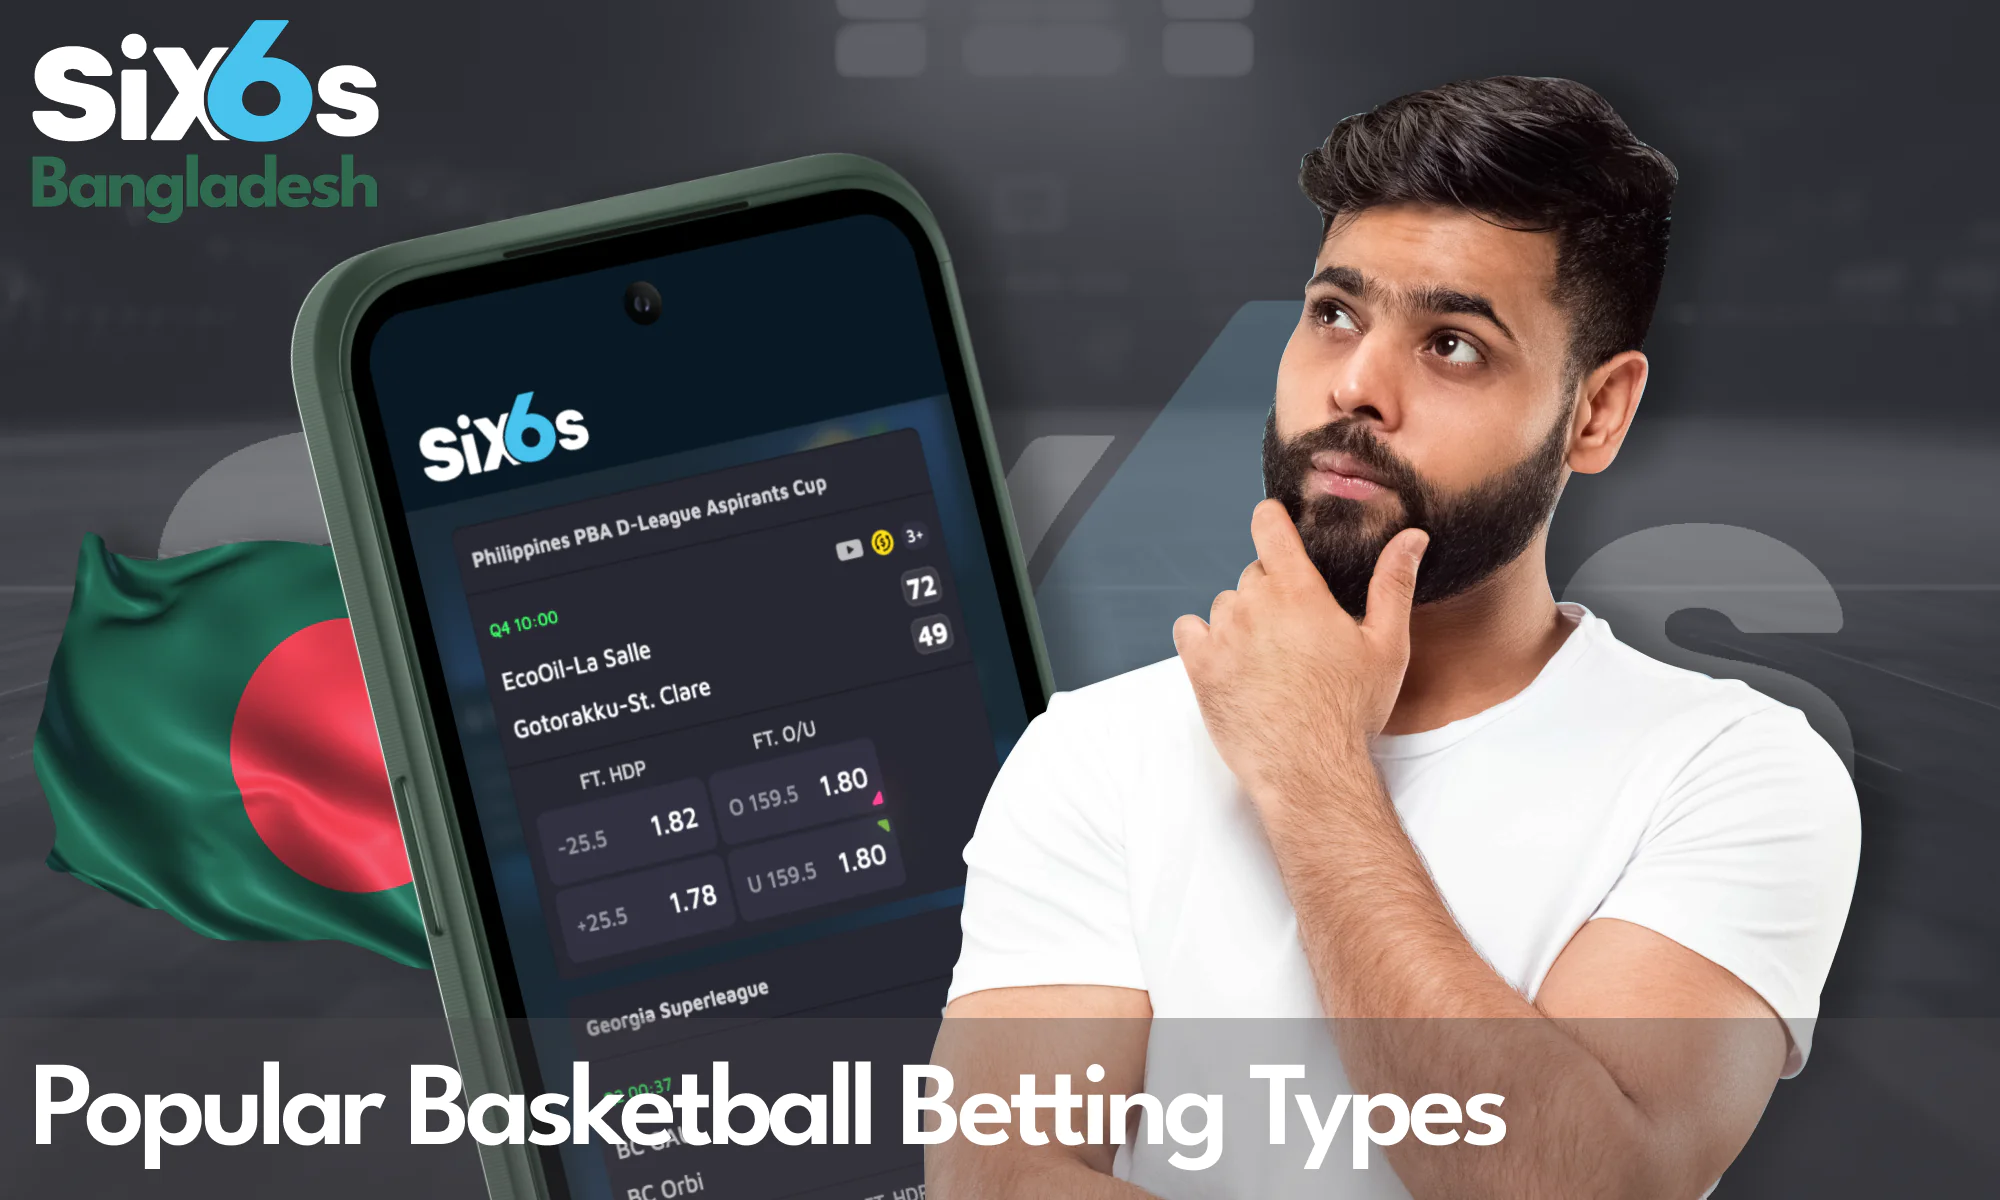 Basketball betting types for players from Bangladesh - Six6s